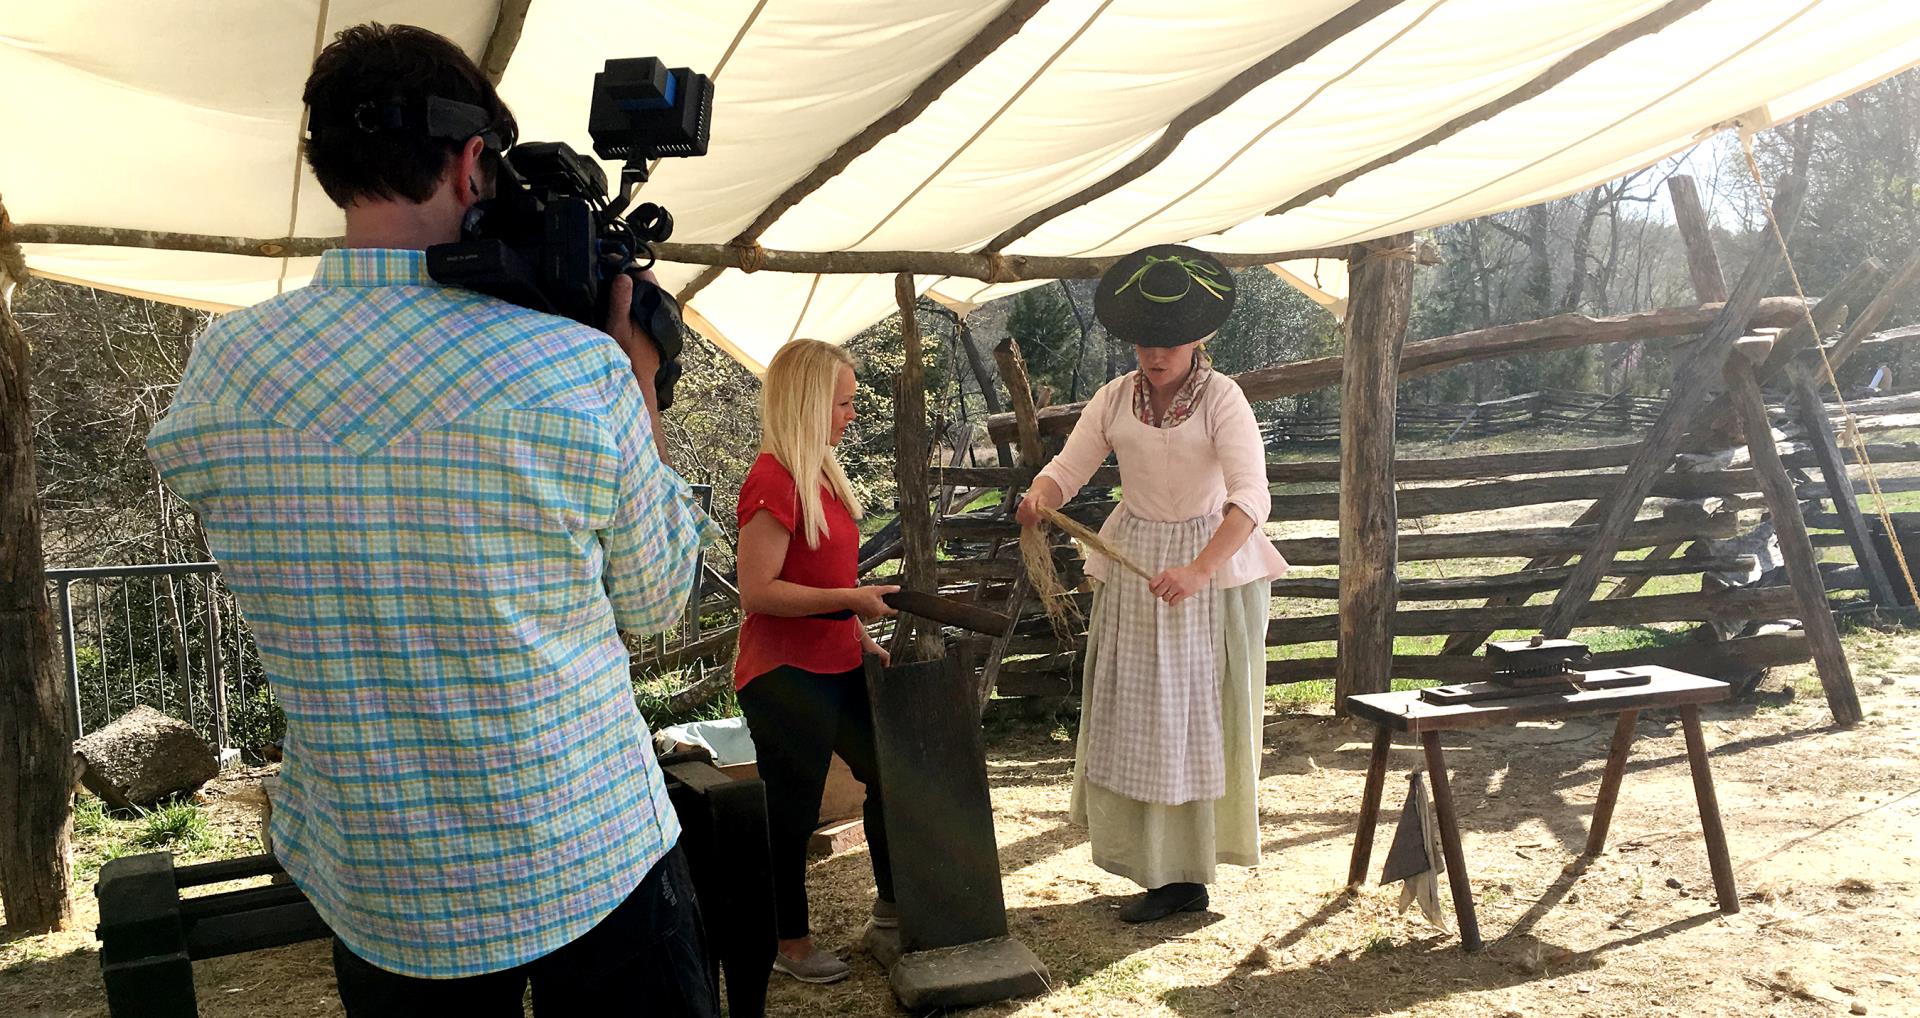 Filming at the American Revolution Museum at Yorktown